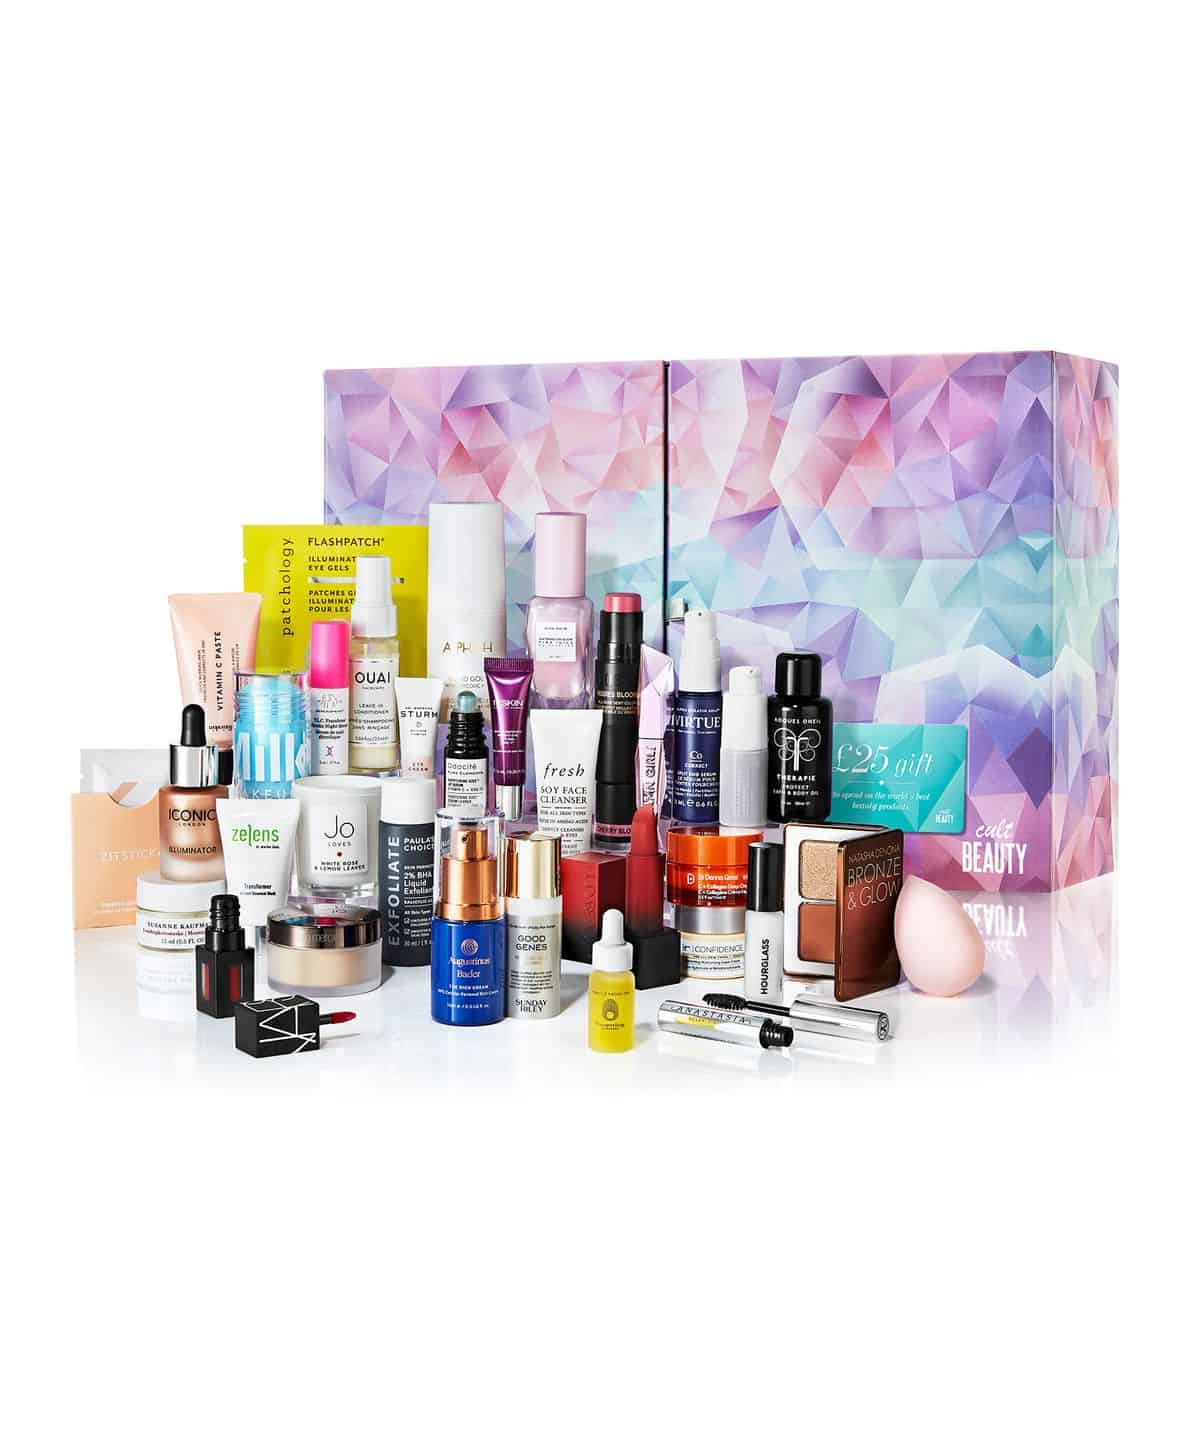 Cult Beauty Advent Calendar Reviews: Get All The Details At Hello ...